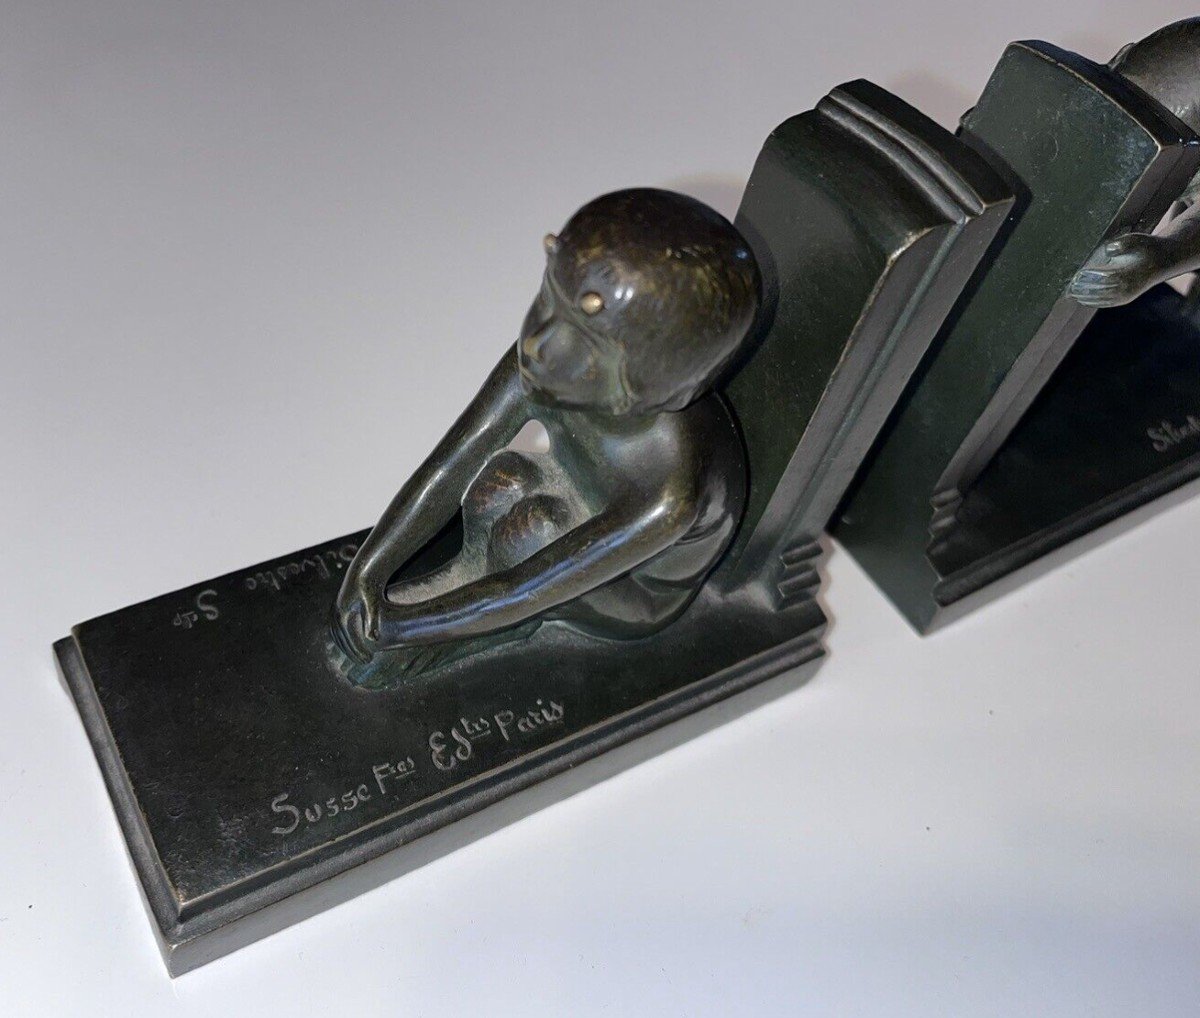 Paul Silvestre & Susse Frères Fondeur Pair Of Faun Bookends Signed With Both Names-photo-4